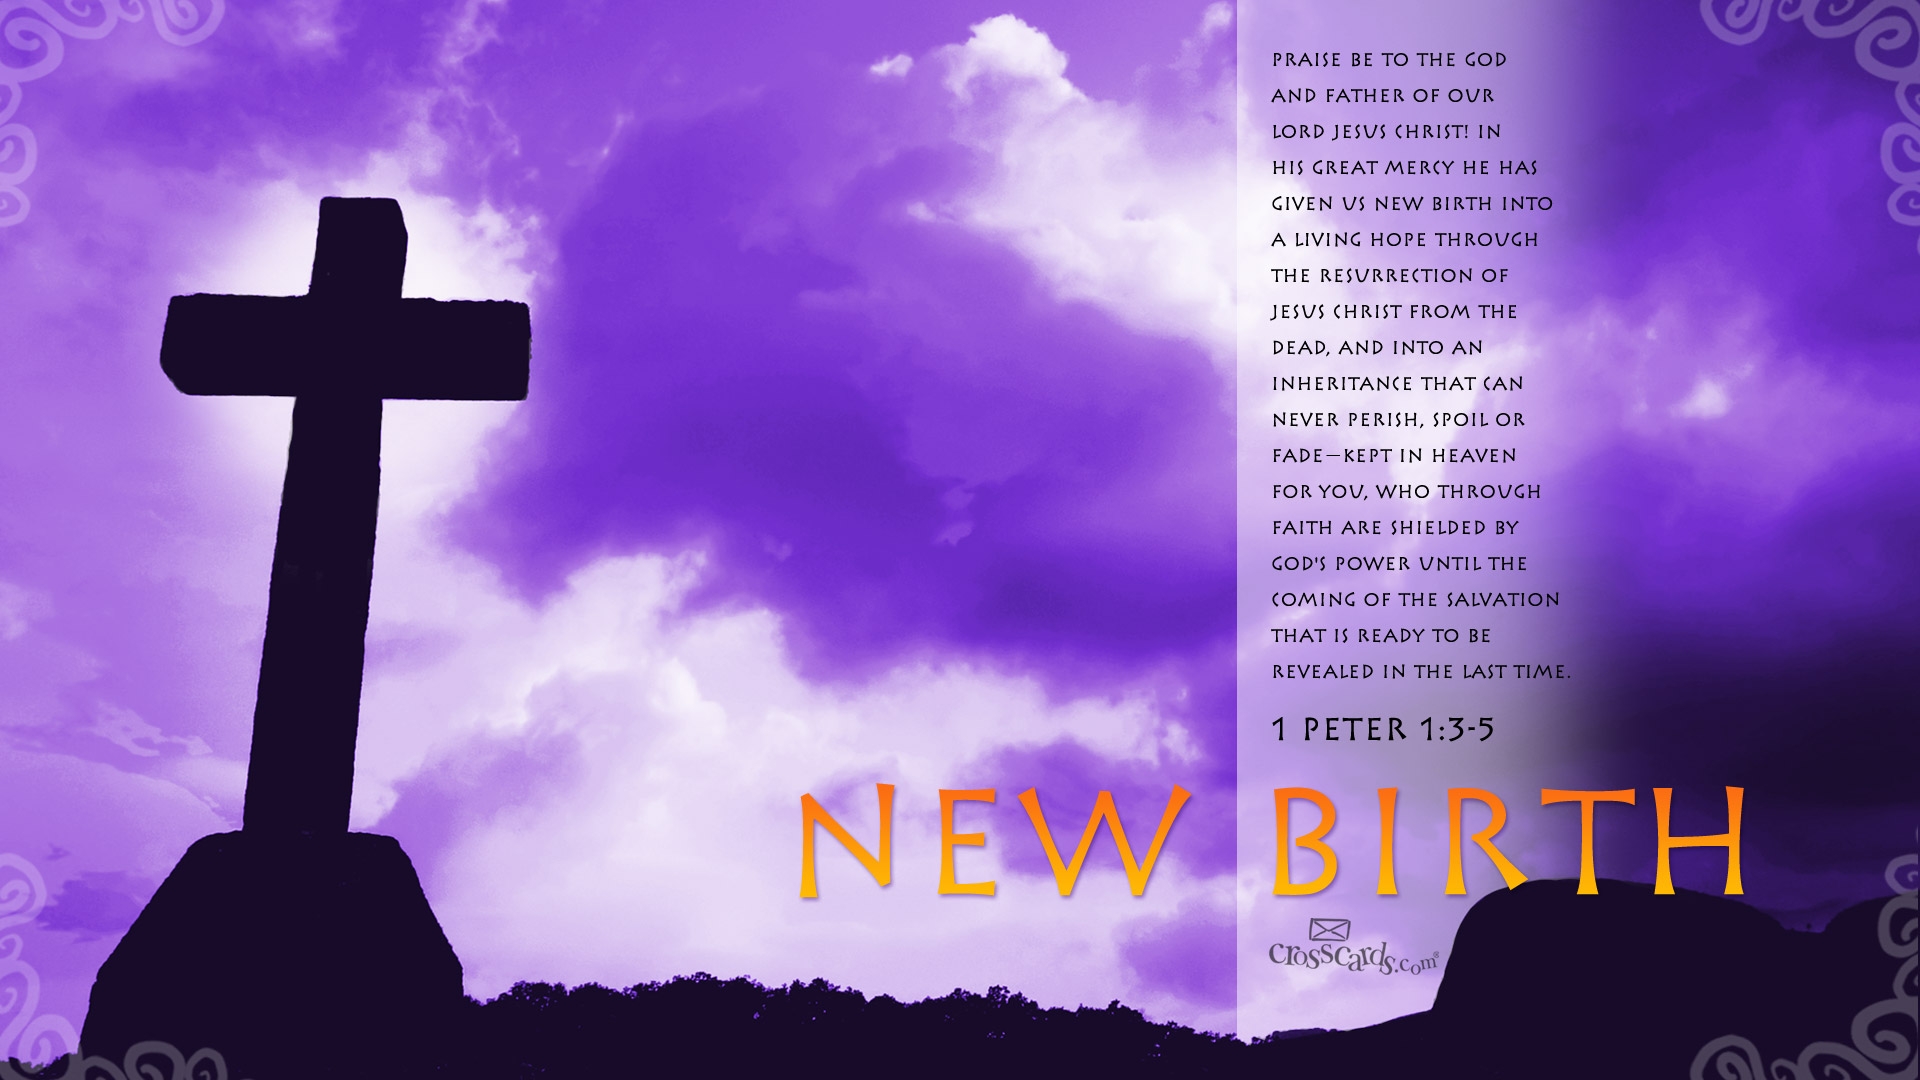 BIBLE VERSES religion quote text poster bible verses yw wallpaper